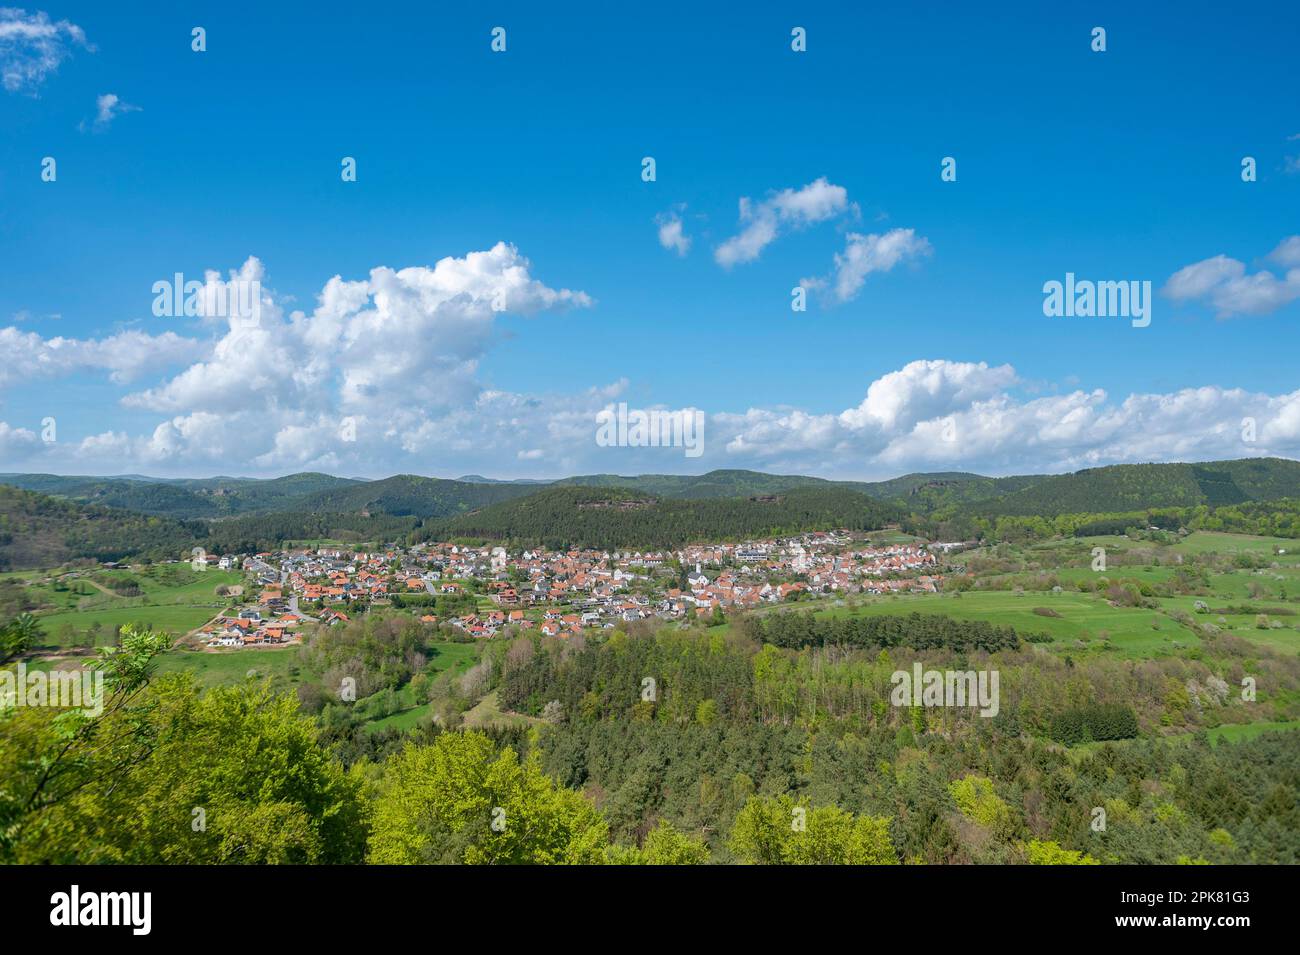 View from the Drachenfels castle ruins to the town of Busenberg and the landscape of the Palatinate Forest Nature Park, Busenberg, Palatinate, Rhinela Stock Photo